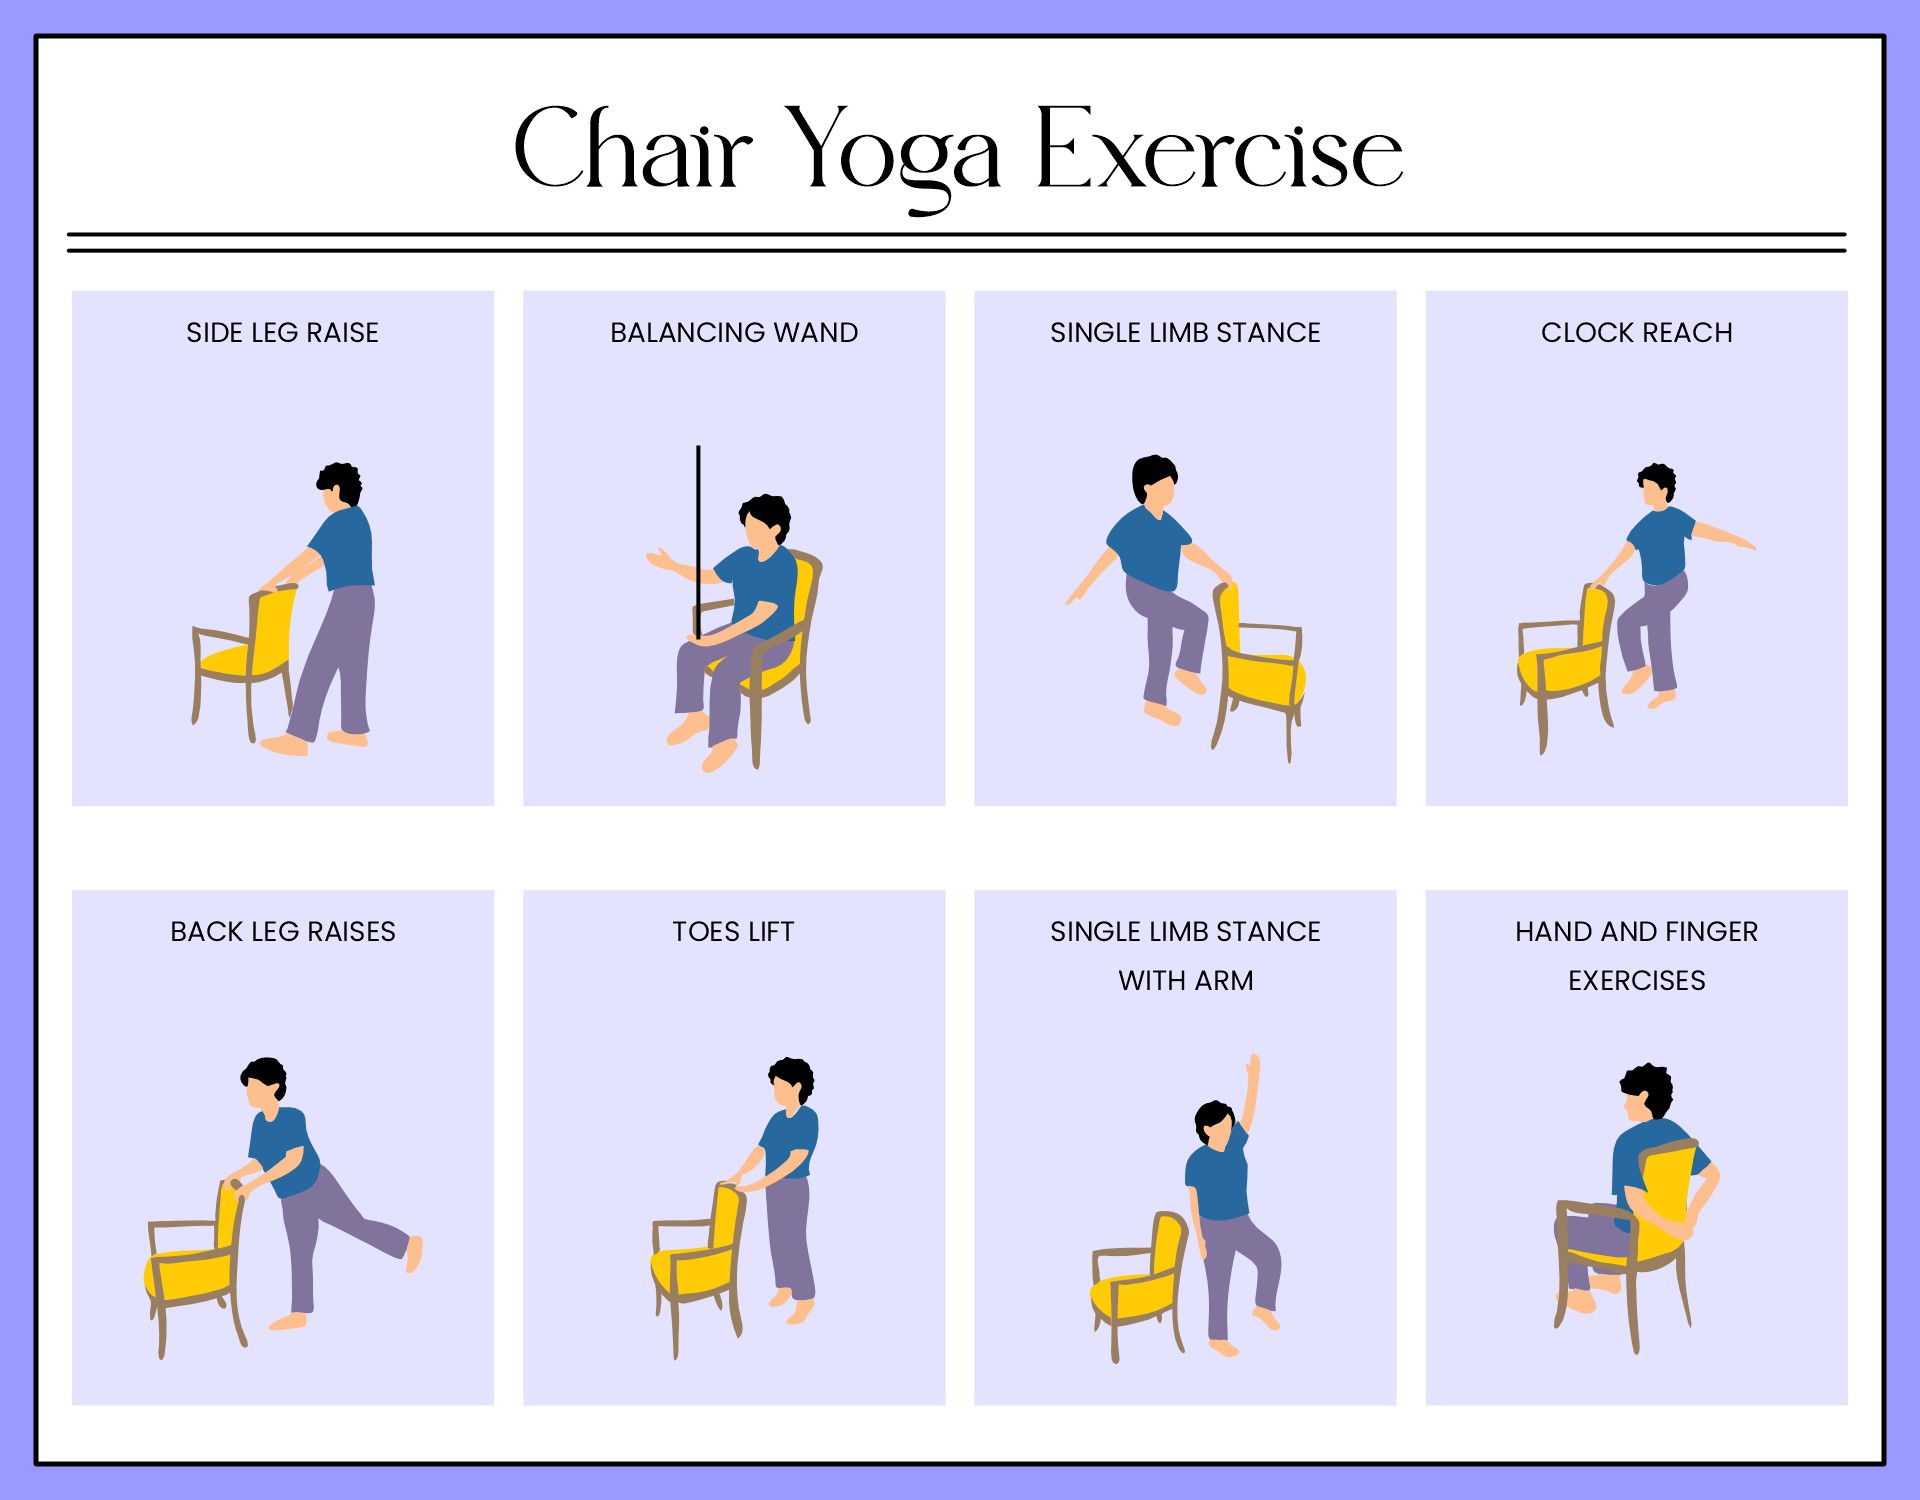 5 Easy Chair Yoga Exercises for Beginners